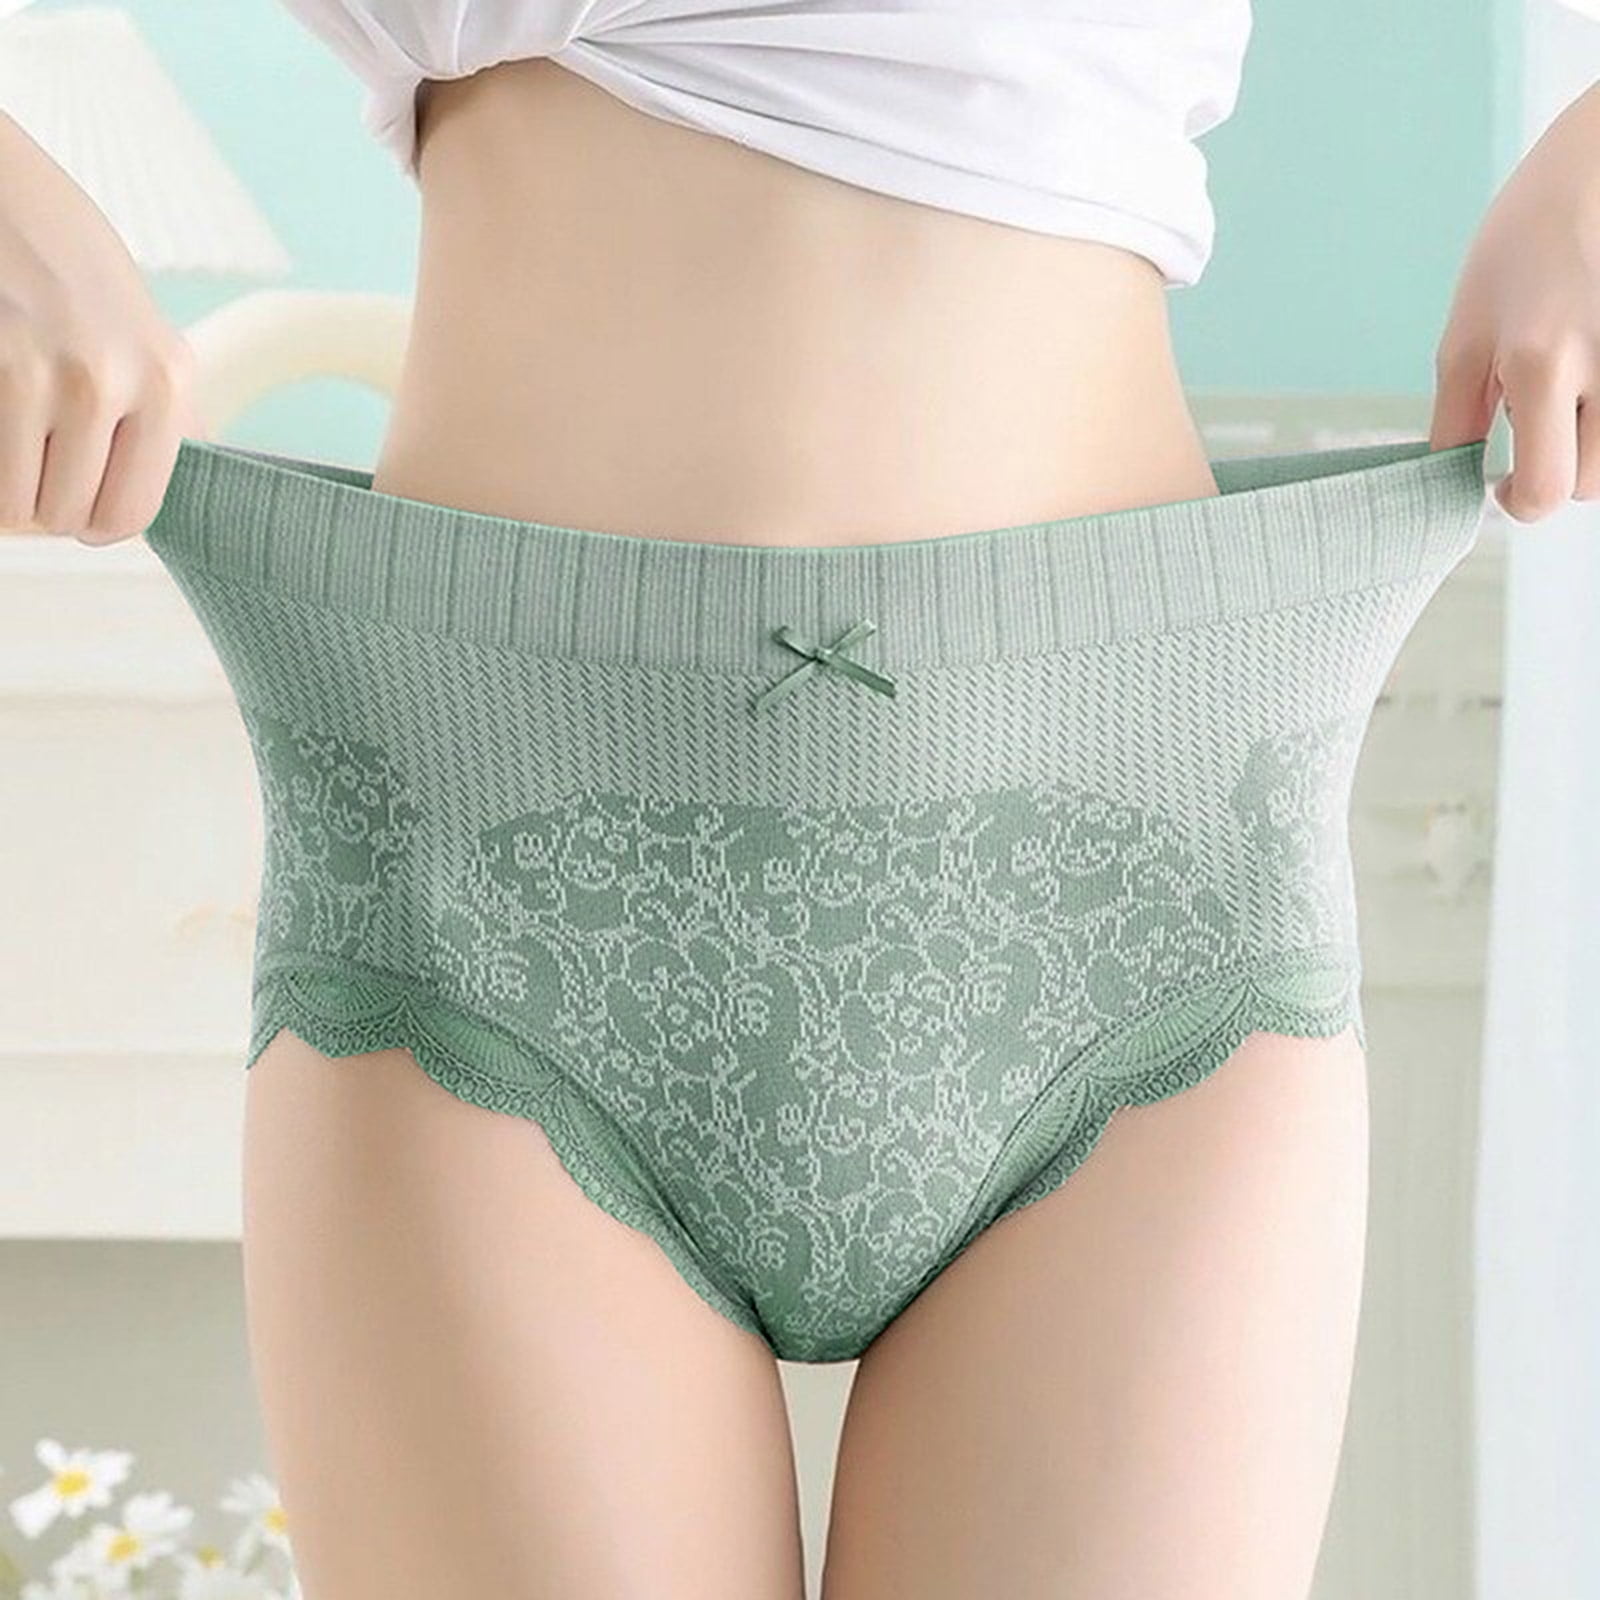 Wholesale Bodycare Panties Cotton, Lace, Seamless, Shaping